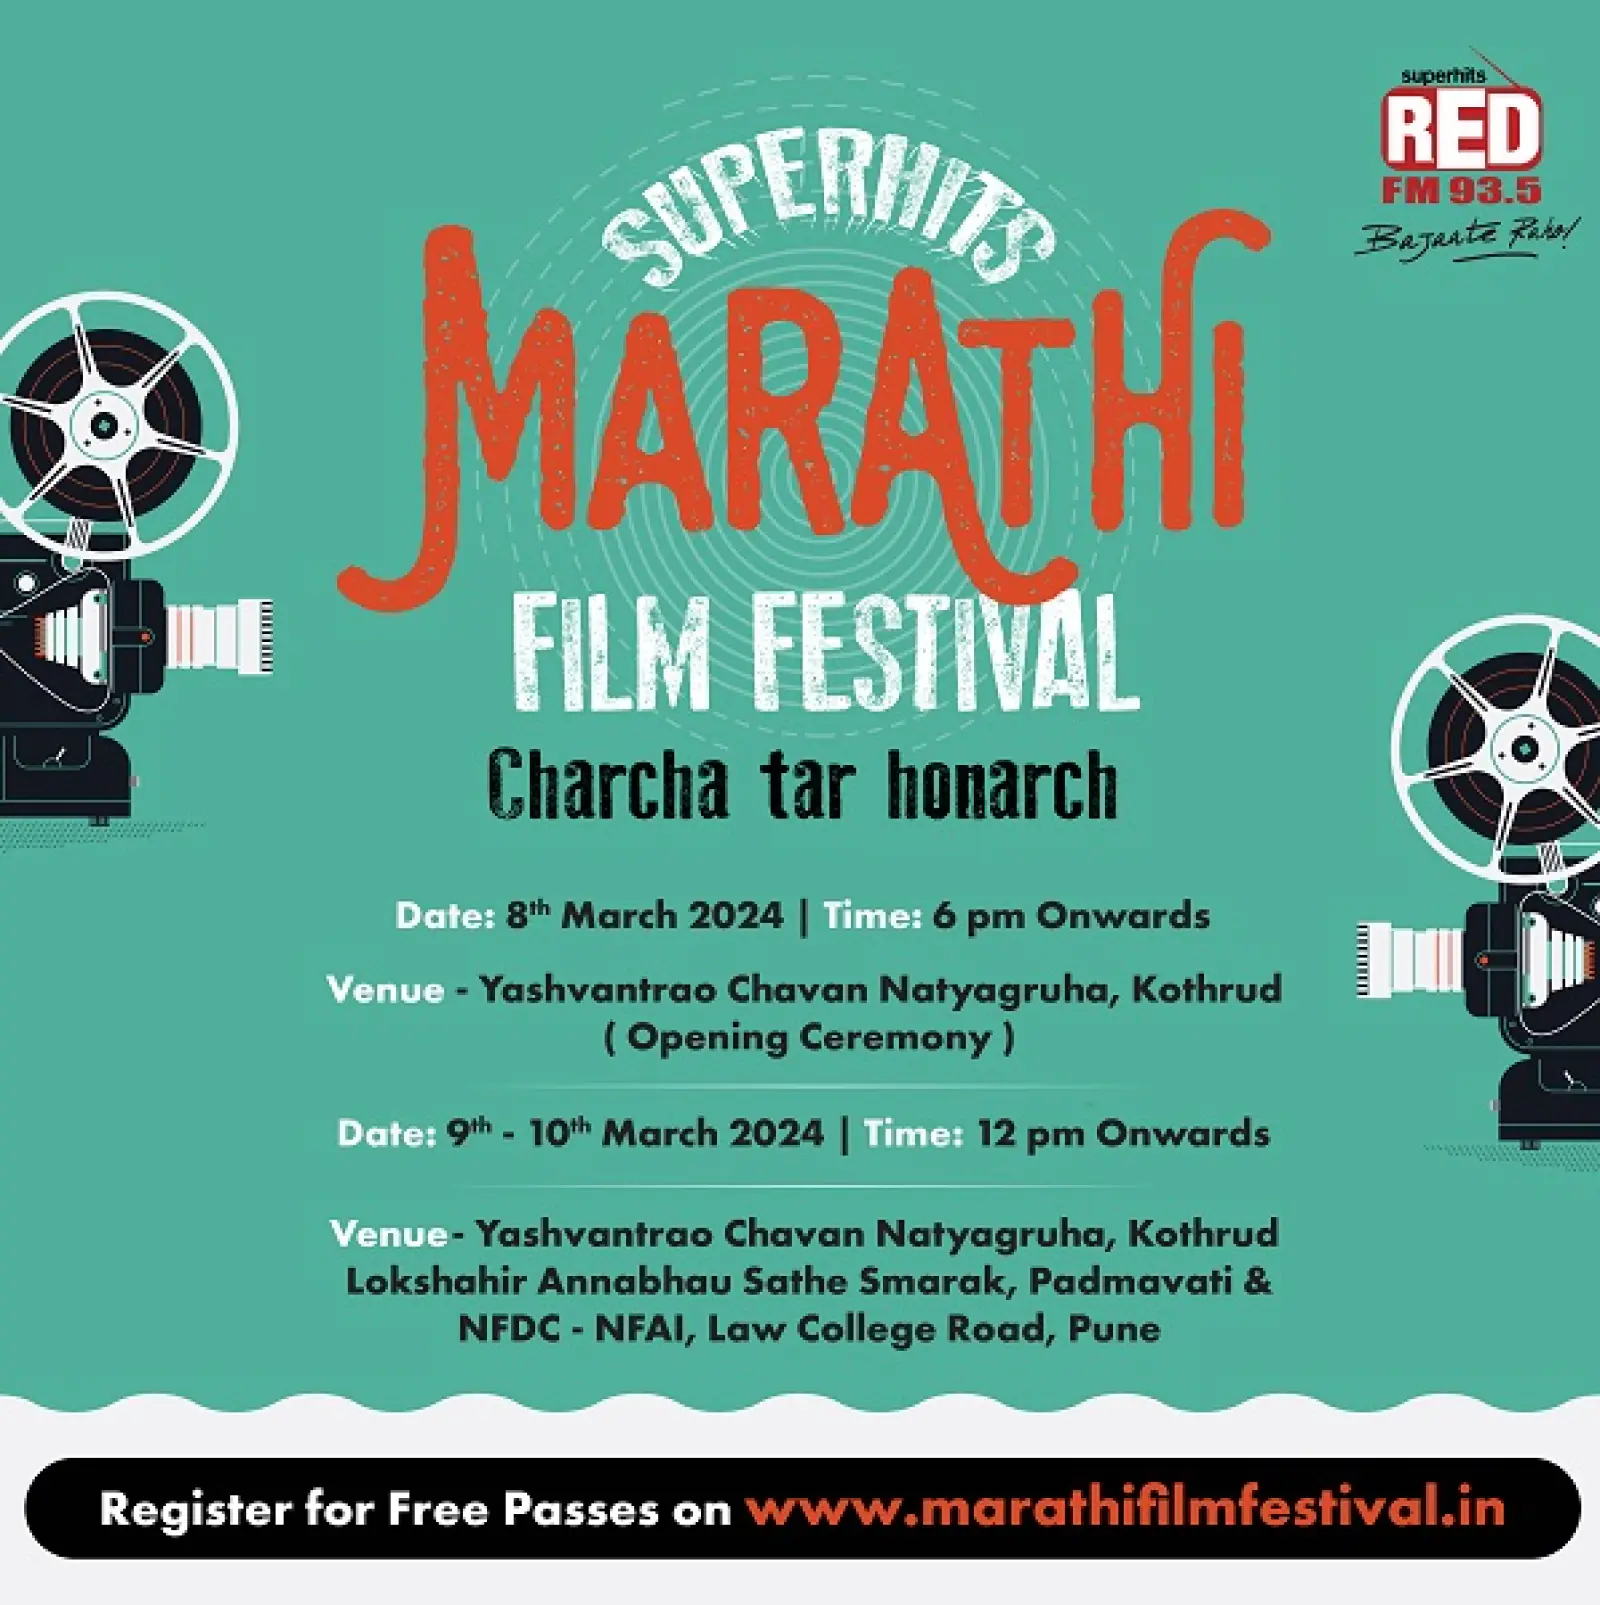 Red FM's Marathi Film Festival Returns to Pune for its 5th Edition